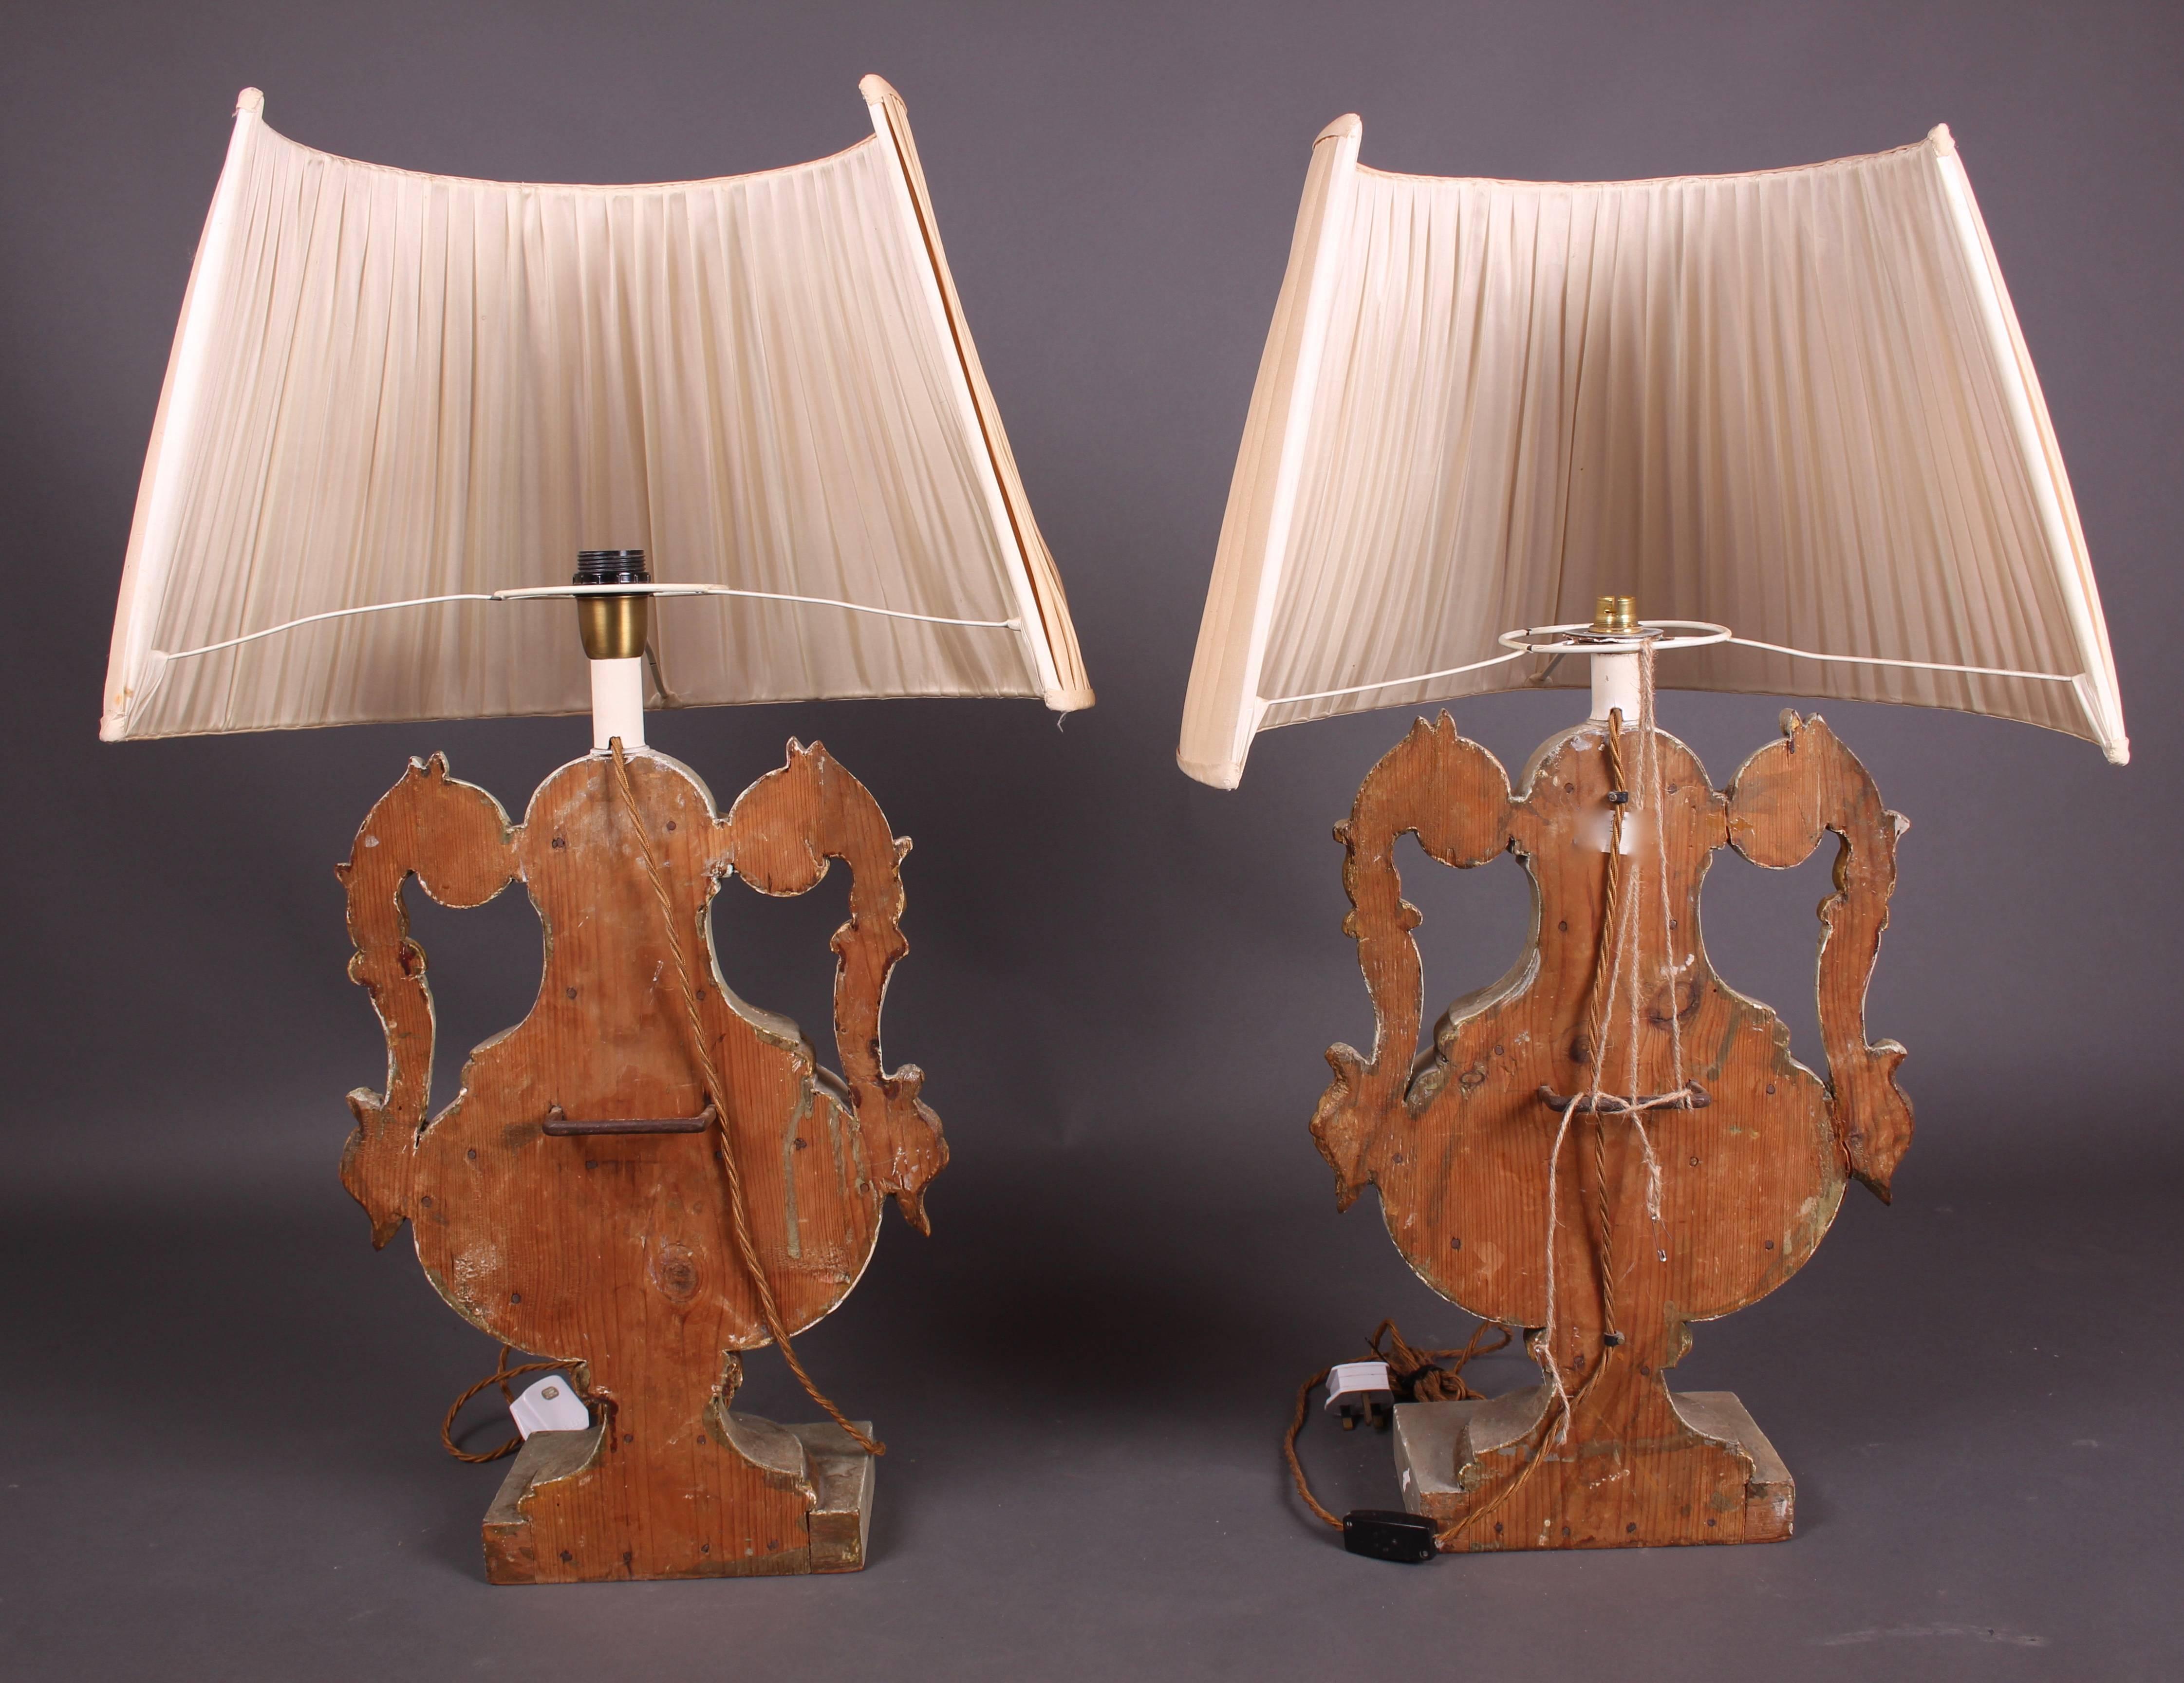 Gesso Pair of Antique Venetian Urn Lamps, Early 19th Century